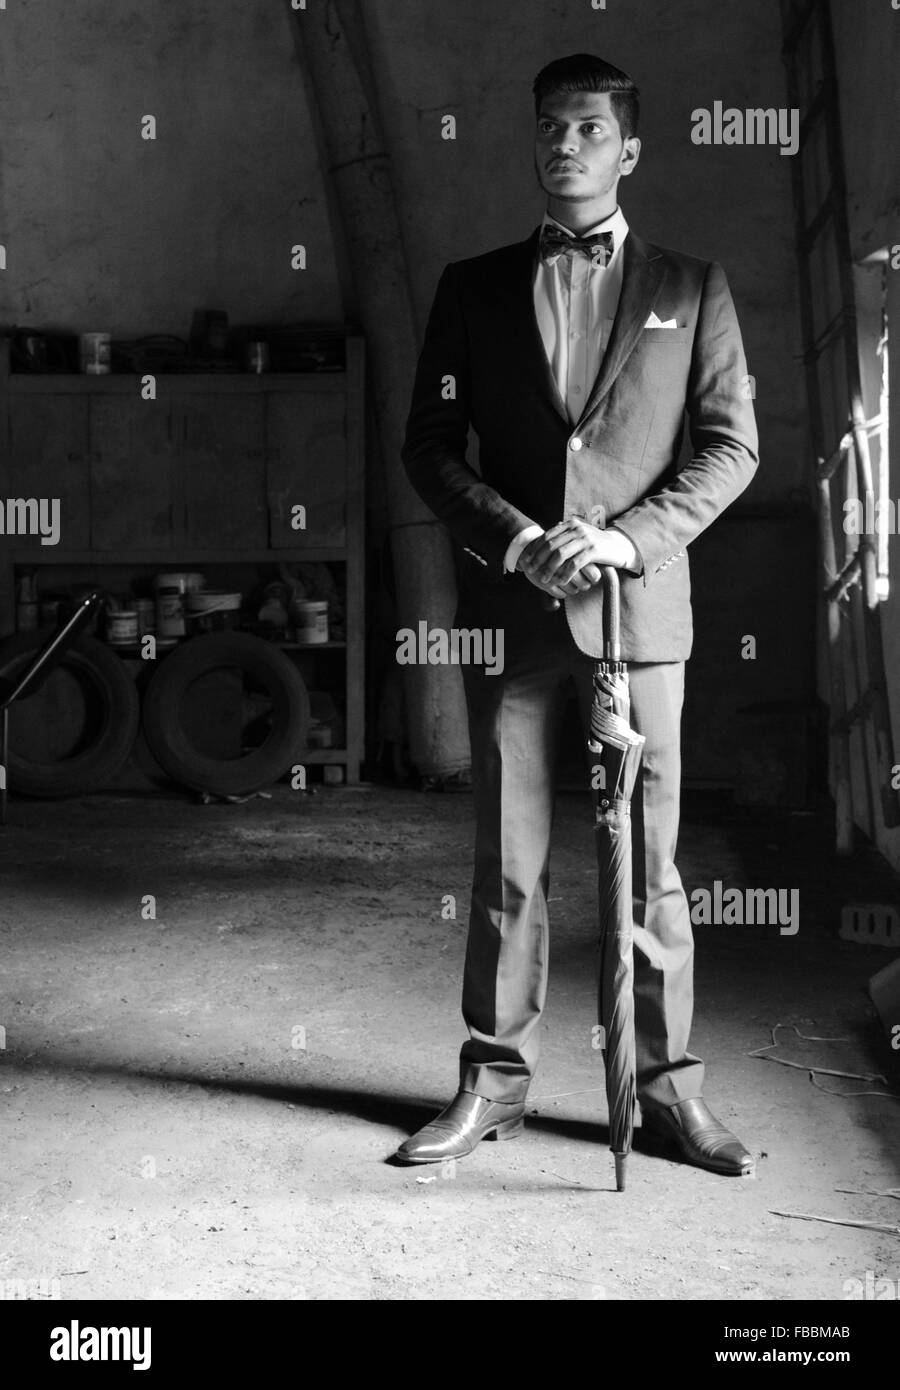 Black and White classic portrait of a young man dressed in black suit, bow tie, posing with umbrella in an old garage room. Stock Photo